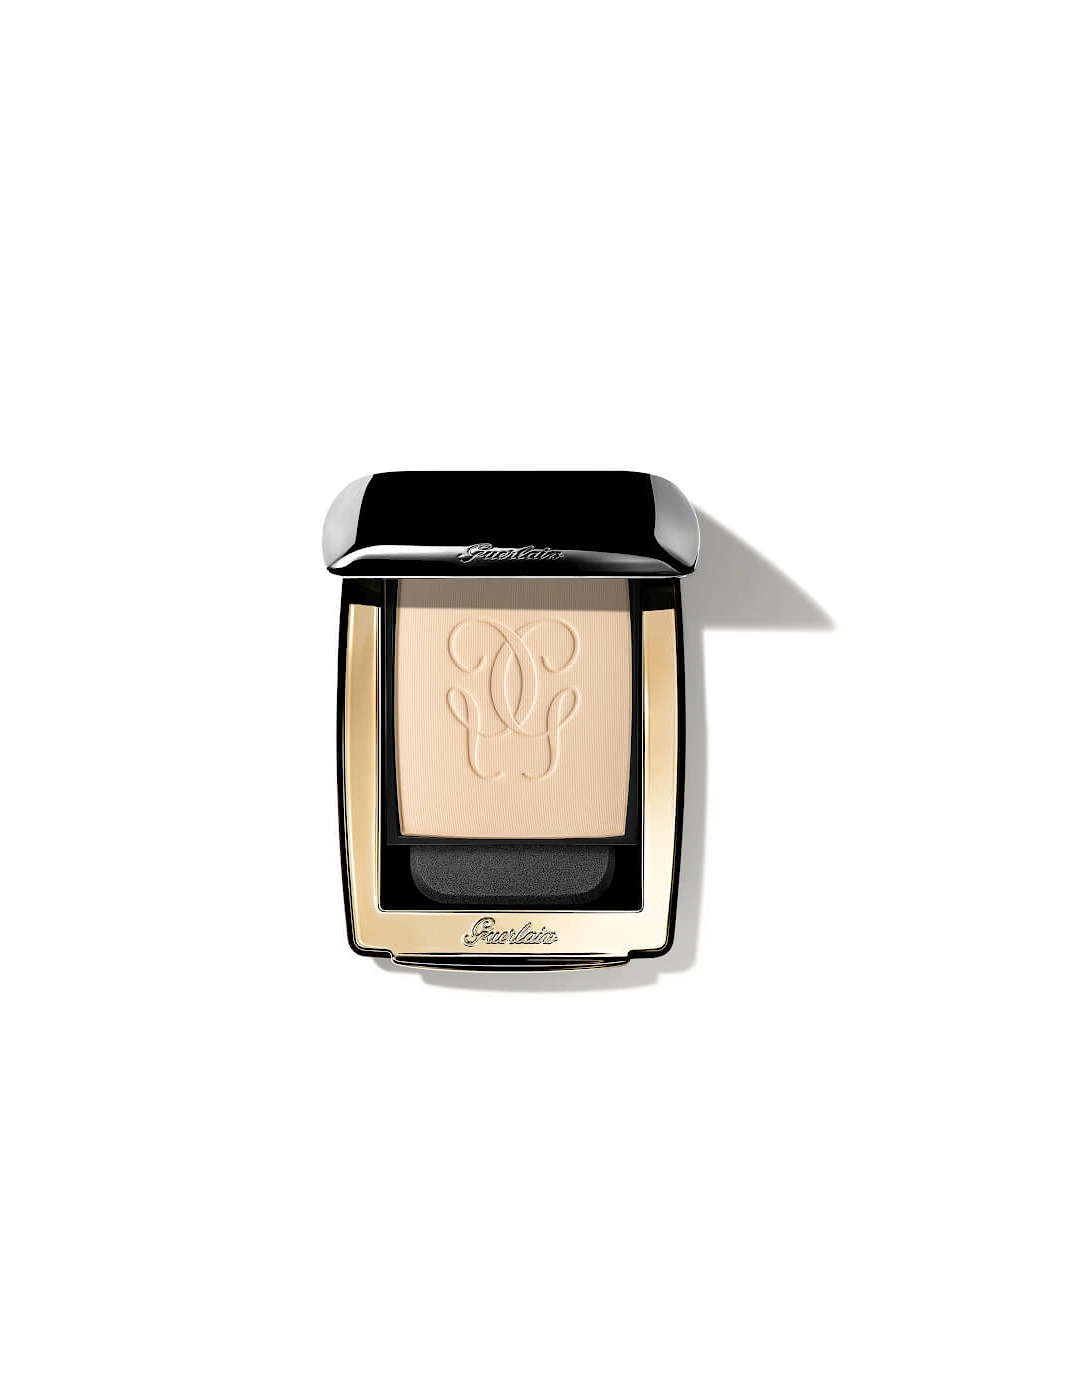 Parure Gold Gold Radiance Powder Foundation - 31 Pale Amber, 2 of 1